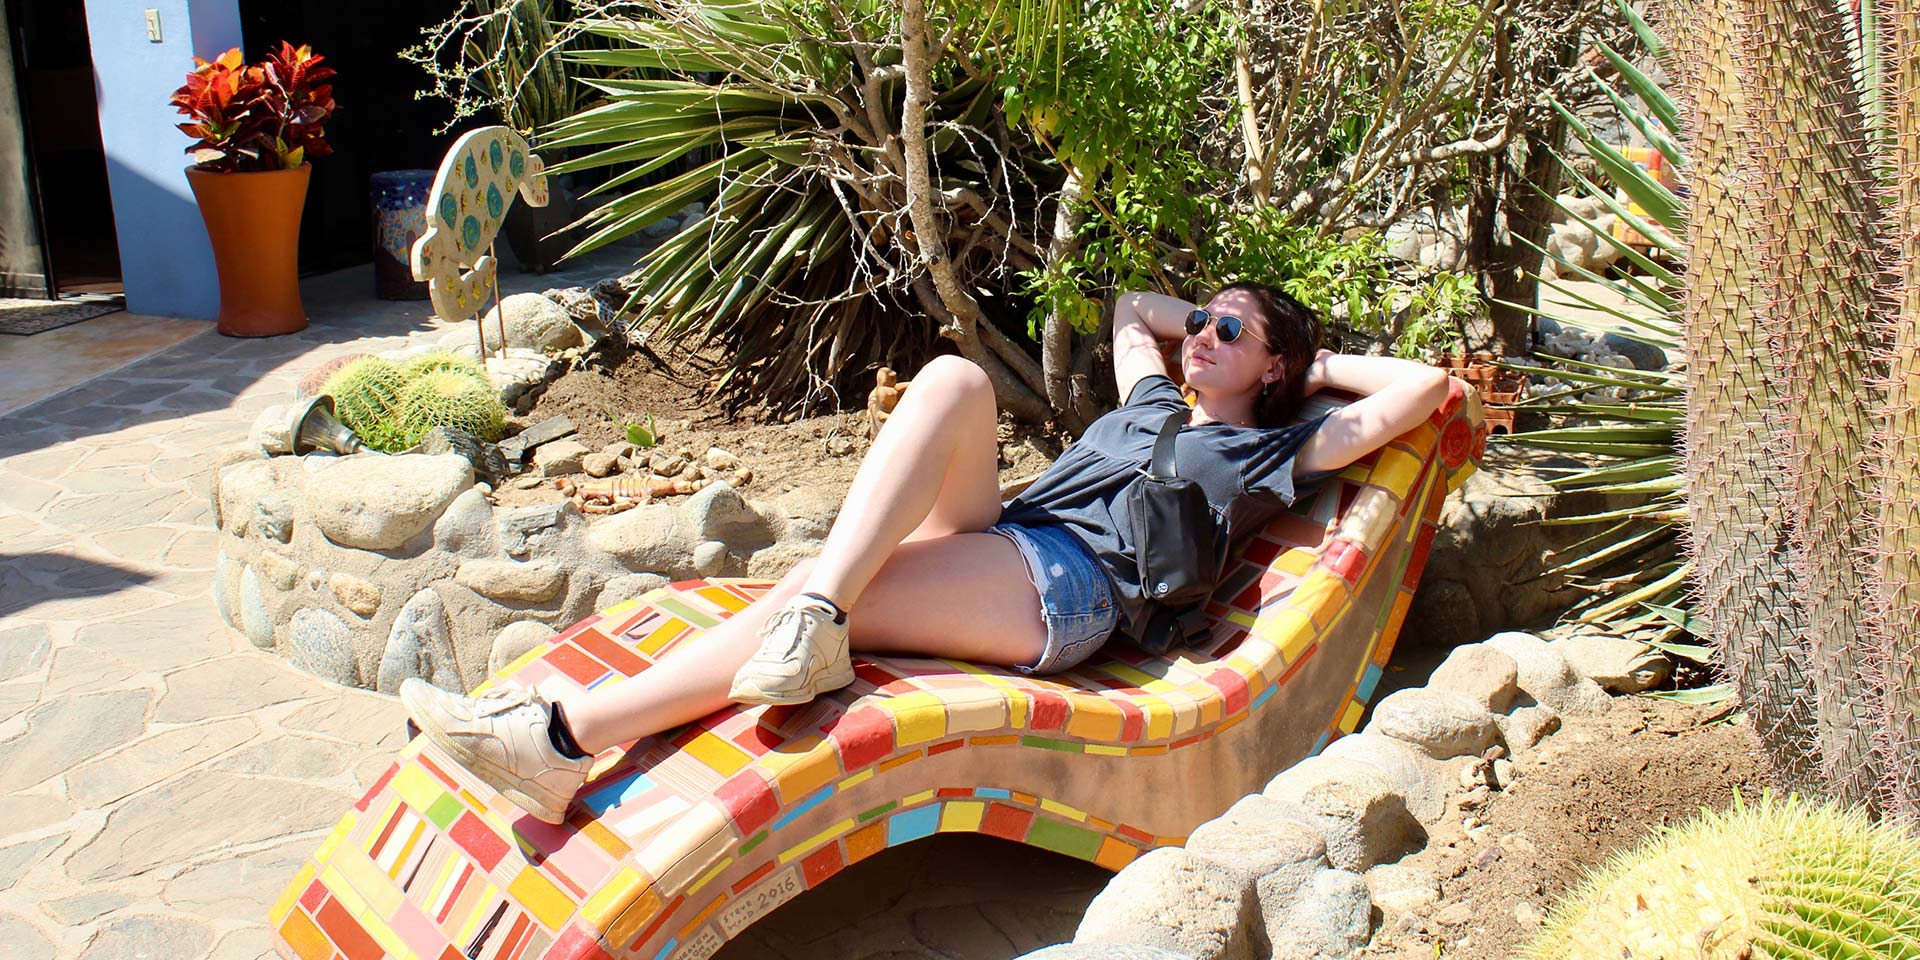 Person in shorts lounging on a beach chair.